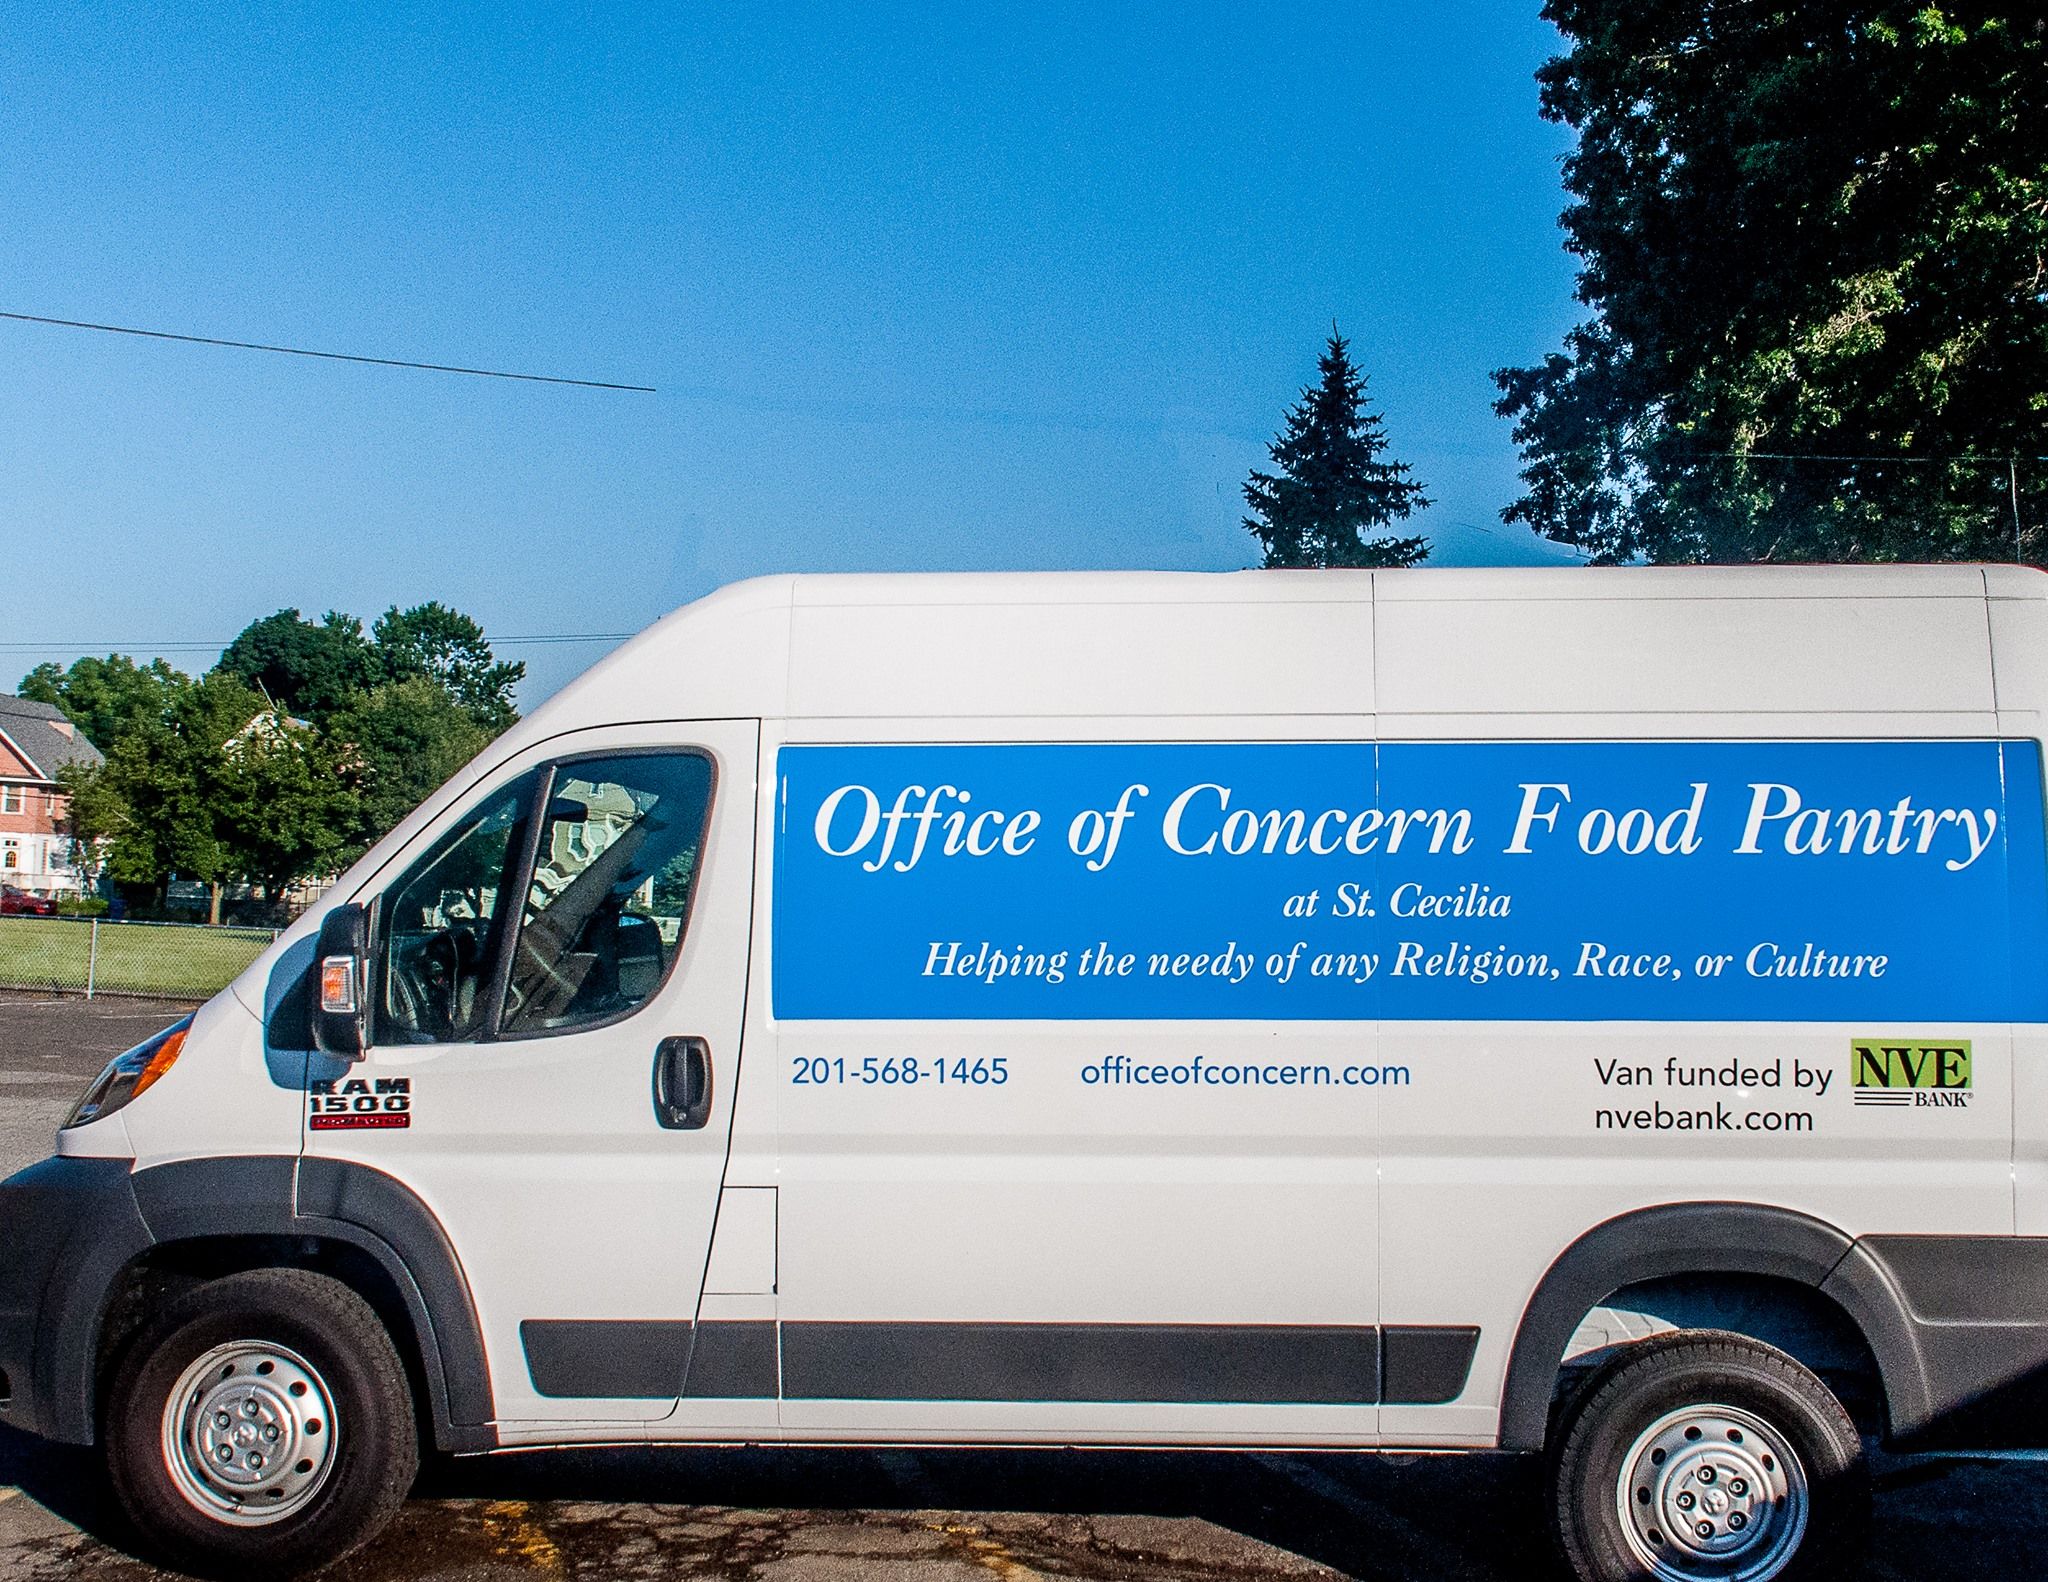 Office of Concern Food Pantry at St. Cecilia